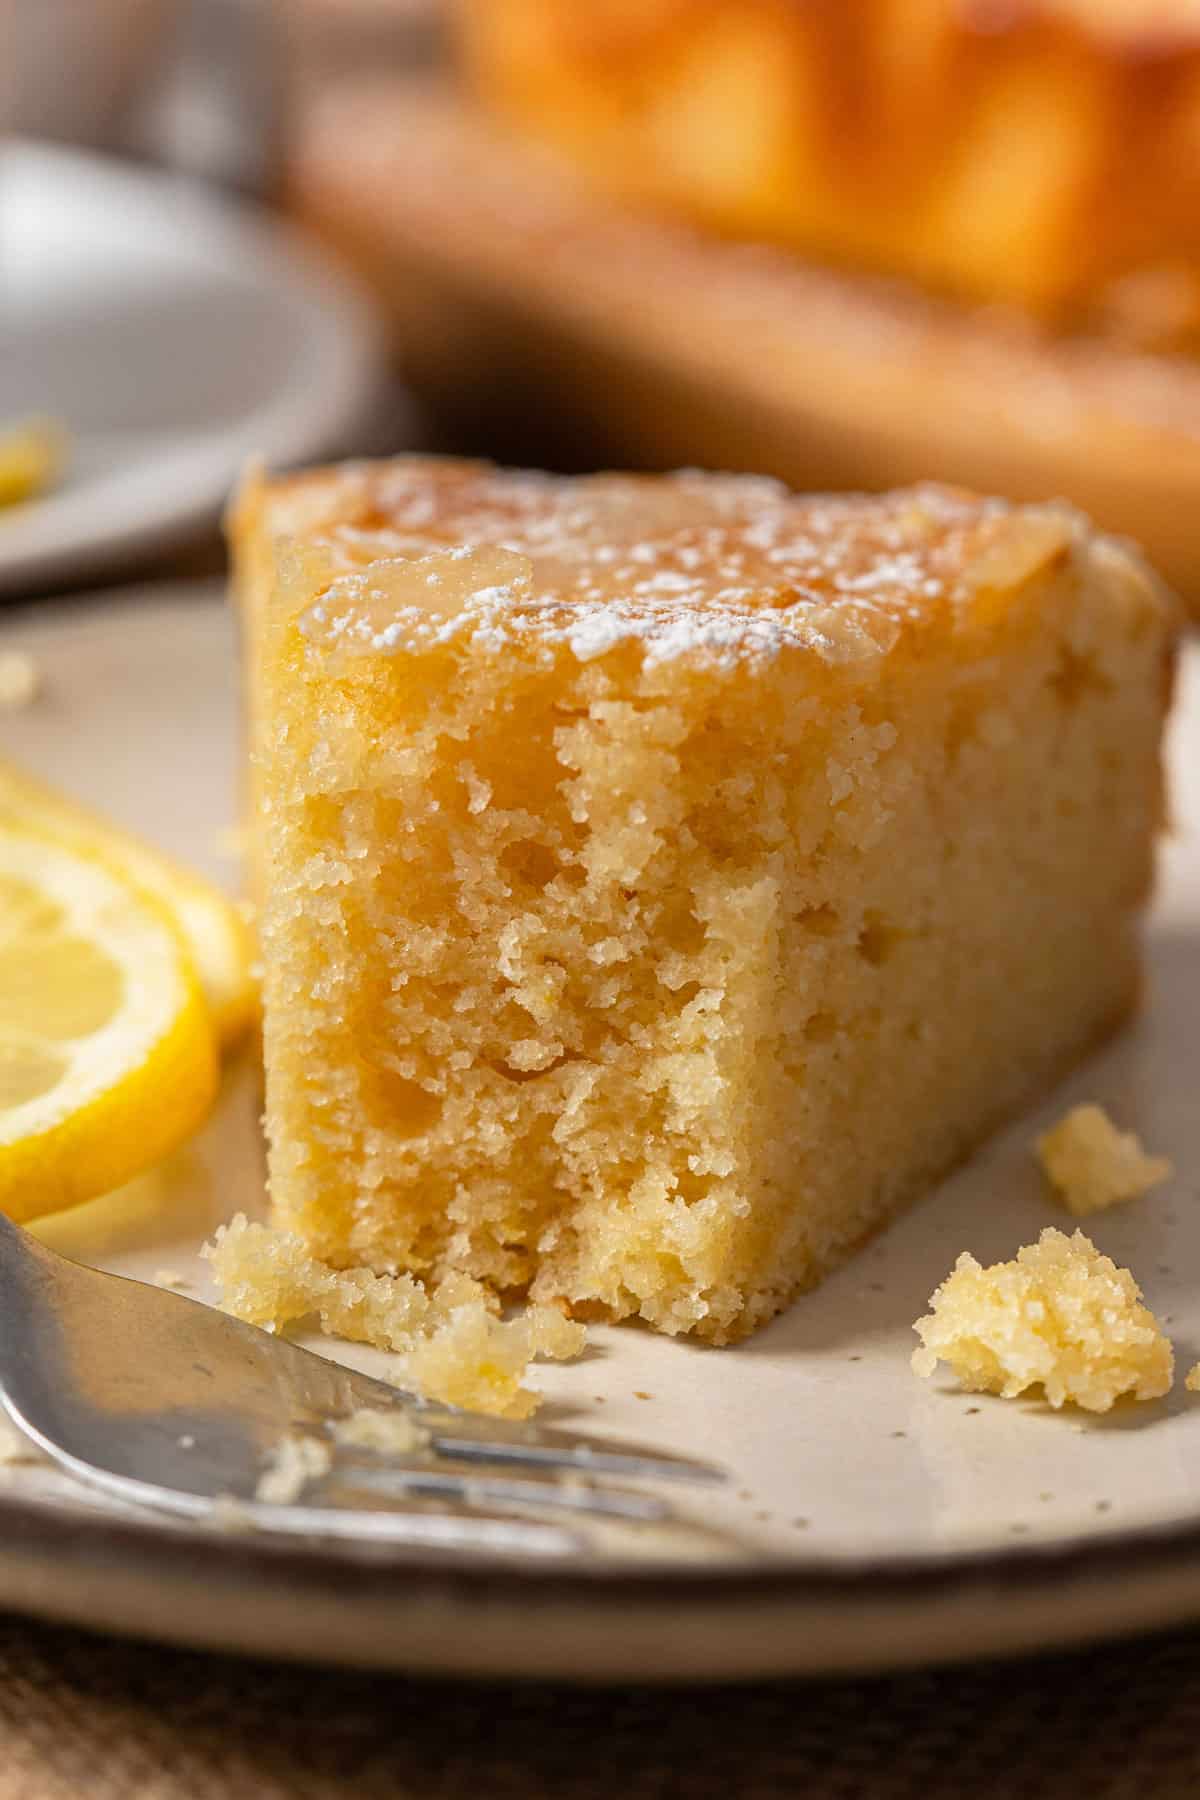 Showing the texture of a slice of the cake.